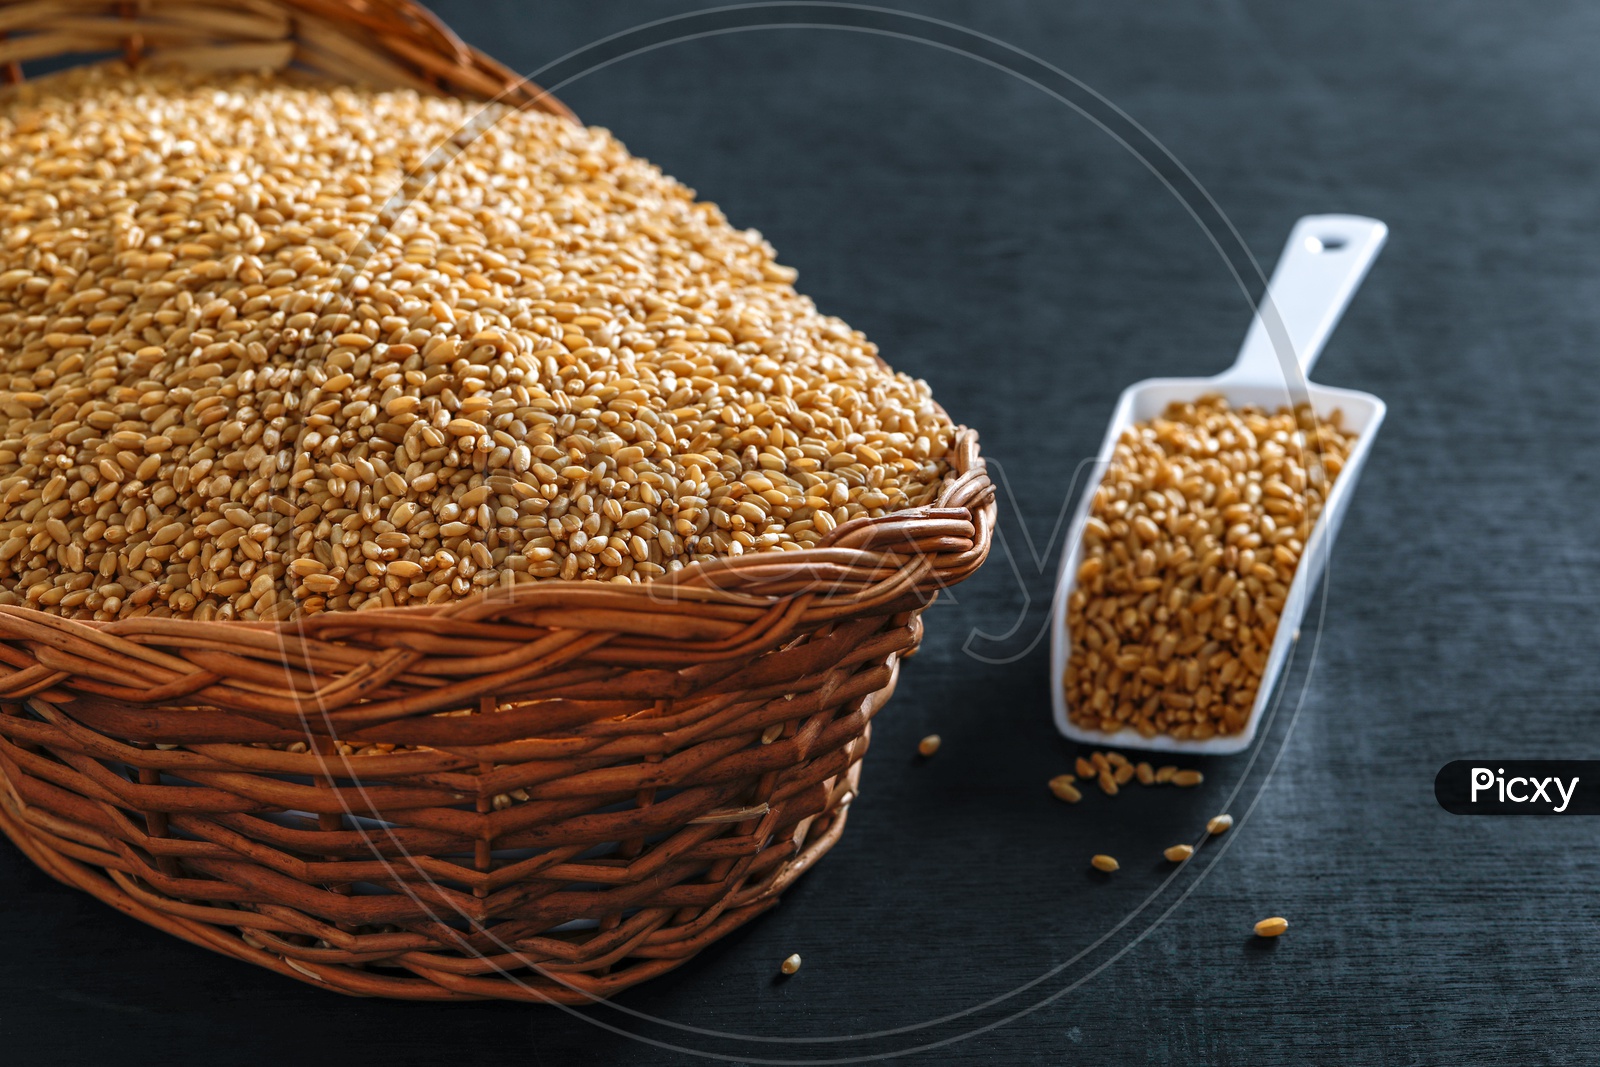 Wheat Grains In an Wooden Weaved Basket On an Isolated  Background